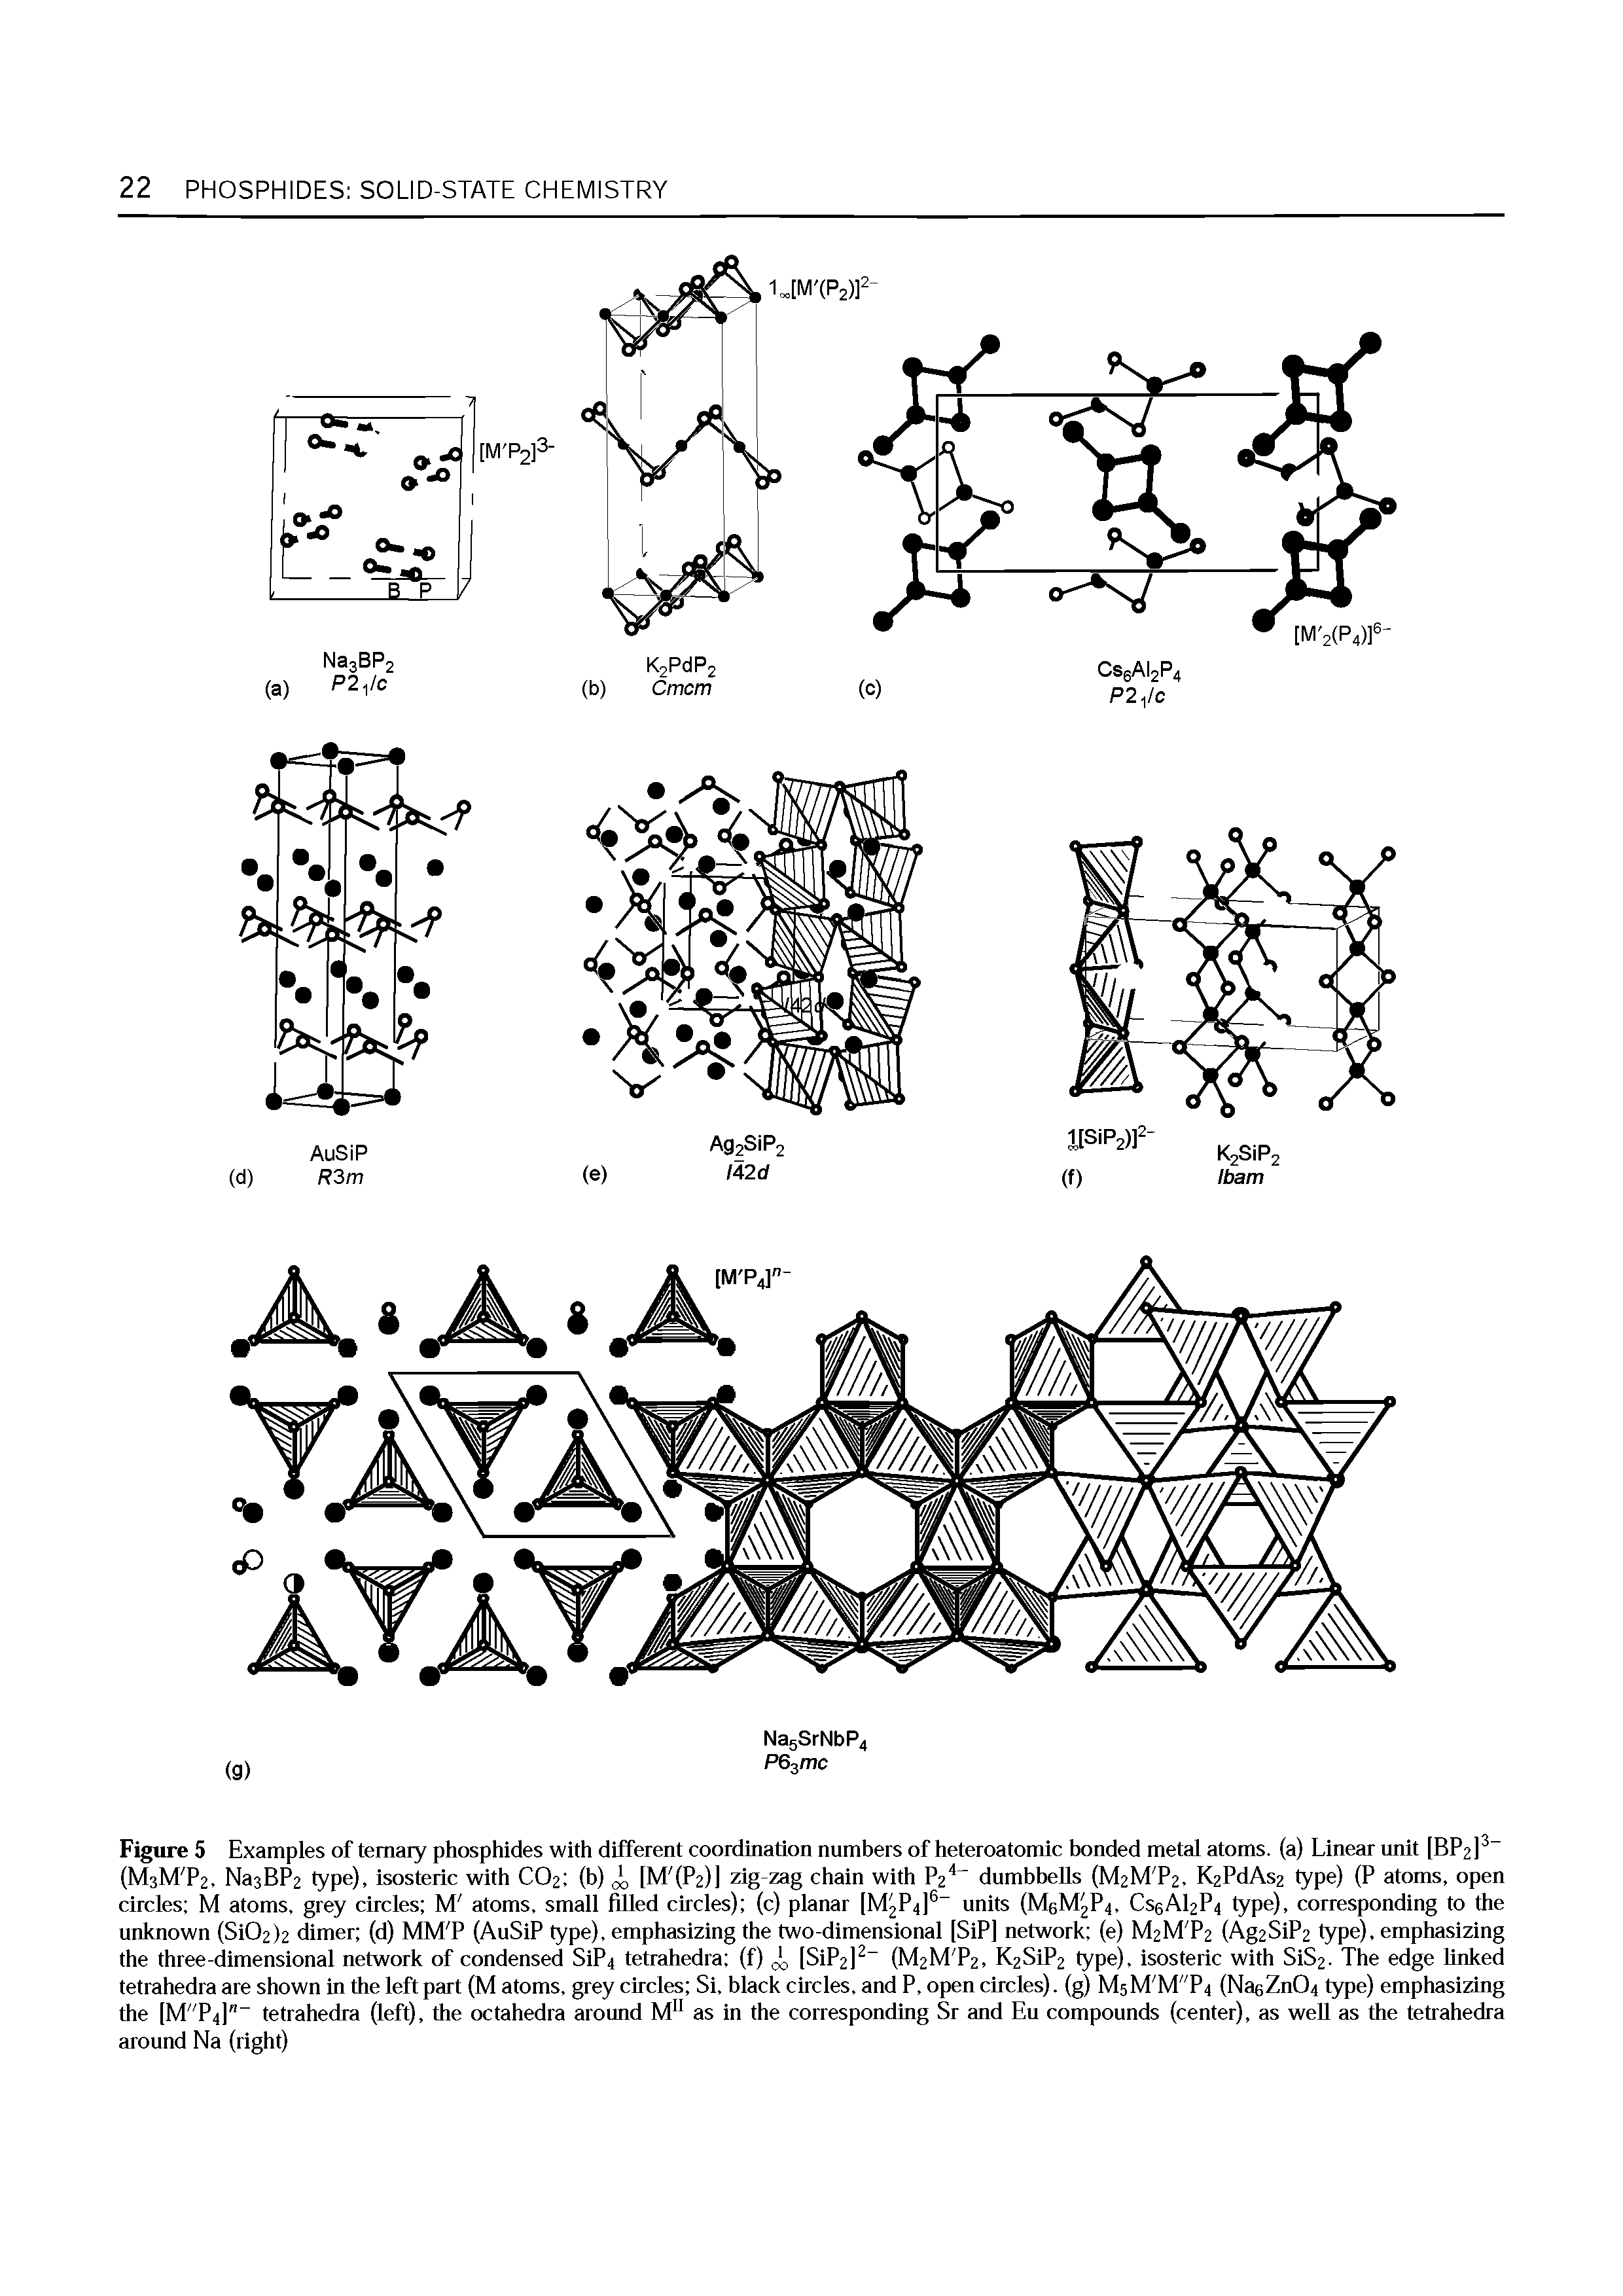 Figure 5 Examples of ternary phosphides with different coordination numbers of heteroatomic bonded metal atoms, (a) Linear unit [BP2] (M3M P2, NasBP2 type), isosteric with CO2 (b) [M (P2)I zig-zag chain with P2 dumbbells (M2M P2, K2PdAs2 type) (P atoms, open...